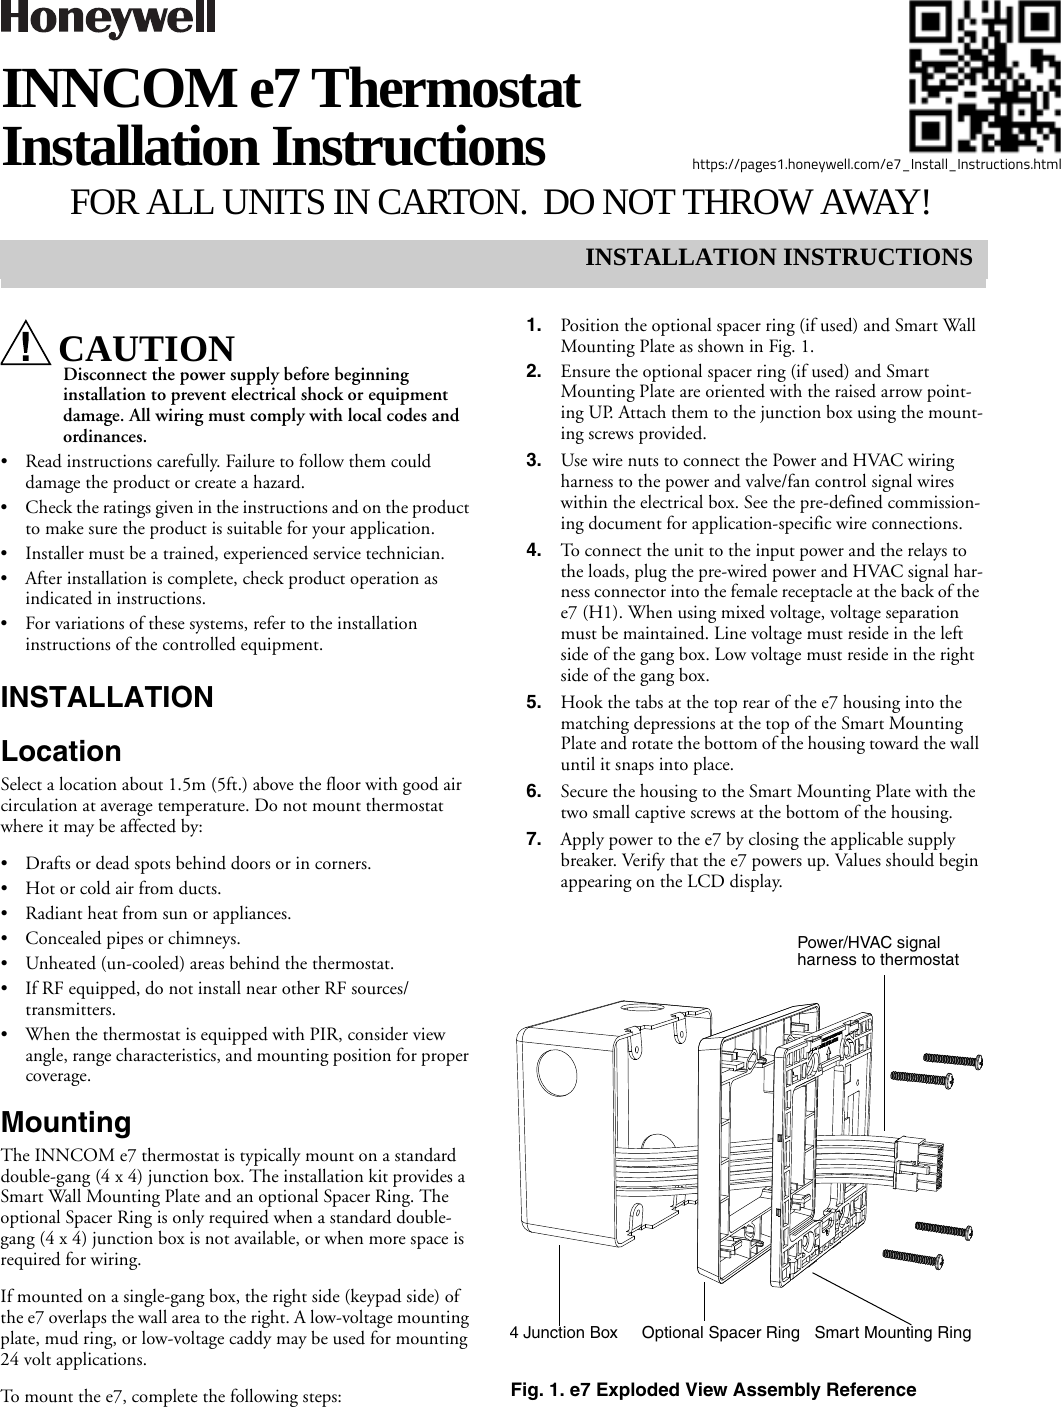 INSTALLATION INSTRUCTIONShttps://pages1.honeywell.com/e7_Install_Instructions.htmlINNCOM e7 Thermostat Installation Instructions  FOR ALL UNITS IN CARTON.  DO NOT THROW AWAY!CAUTIONDisconnect the power supply before beginning installation to prevent electrical shock or equipment damage. All wiring must comply with local codes and ordinances.• Read instructions carefully. Failure to follow them could damage the product or create a hazard.• Check the ratings given in the instructions and on the product to make sure the product is suitable for your application.• Installer must be a trained, experienced service technician.• After installation is complete, check product operation as indicated in instructions.• For variations of these systems, refer to the installation instructions of the controlled equipment.INSTALLATIONLocationSelect a location about 1.5m (5ft.) above the floor with good air circulation at average temperature. Do not mount thermostat where it may be affected by:• Drafts or dead spots behind doors or in corners.• Hot or cold air from ducts.• Radiant heat from sun or appliances.• Concealed pipes or chimneys.• Unheated (un-cooled) areas behind the thermostat.• If RF equipped, do not install near other RF sources/transmitters.• When the thermostat is equipped with PIR, consider view angle, range characteristics, and mounting position for proper coverage.MountingThe INNCOM e7 thermostat is typically mount on a standard double-gang (4 x 4) junction box. The installation kit provides a Smart Wall Mounting Plate and an optional Spacer Ring. The optional Spacer Ring is only required when a standard double-gang (4 x 4) junction box is not available, or when more space is required for wiring.  If mounted on a single-gang box, the right side (keypad side) of the e7 overlaps the wall area to the right. A low-voltage mounting plate, mud ring, or low-voltage caddy may be used for mounting 24 volt applications.To mount the e7, complete the following steps: 1. Position the optional spacer ring (if used) and Smart Wall Mounting Plate as shown in Fig. 1. 2. Ensure the optional spacer ring (if used) and Smart Mounting Plate are oriented with the raised arrow point-ing UP. Attach them to the junction box using the mount-ing screws provided.3. Use wire nuts to connect the Power and HVAC wiring harness to the power and valve/fan control signal wires within the electrical box. See the pre-defined commission-ing document for application-specific wire connections. 4. To connect the unit to the input power and the relays to the loads, plug the pre-wired power and HVAC signal har-ness connector into the female receptacle at the back of the e7 (H1). When using mixed voltage, voltage separation must be maintained. Line voltage must reside in the left side of the gang box. Low voltage must reside in the right side of the gang box.5. Hook the tabs at the top rear of the e7 housing into the matching depressions at the top of the Smart Mounting Plate and rotate the bottom of the housing toward the wall until it snaps into place.6. Secure the housing to the Smart Mounting Plate with the two small captive screws at the bottom of the housing.7. Apply power to the e7 by closing the applicable supply breaker. Verify that the e7 powers up. Values should begin appearing on the LCD display.Fig. 1. e7 Exploded View Assembly ReferenceOptional Spacer Ring4 Junction Box Smart Mounting RingPower/HVAC signal harness to thermostat